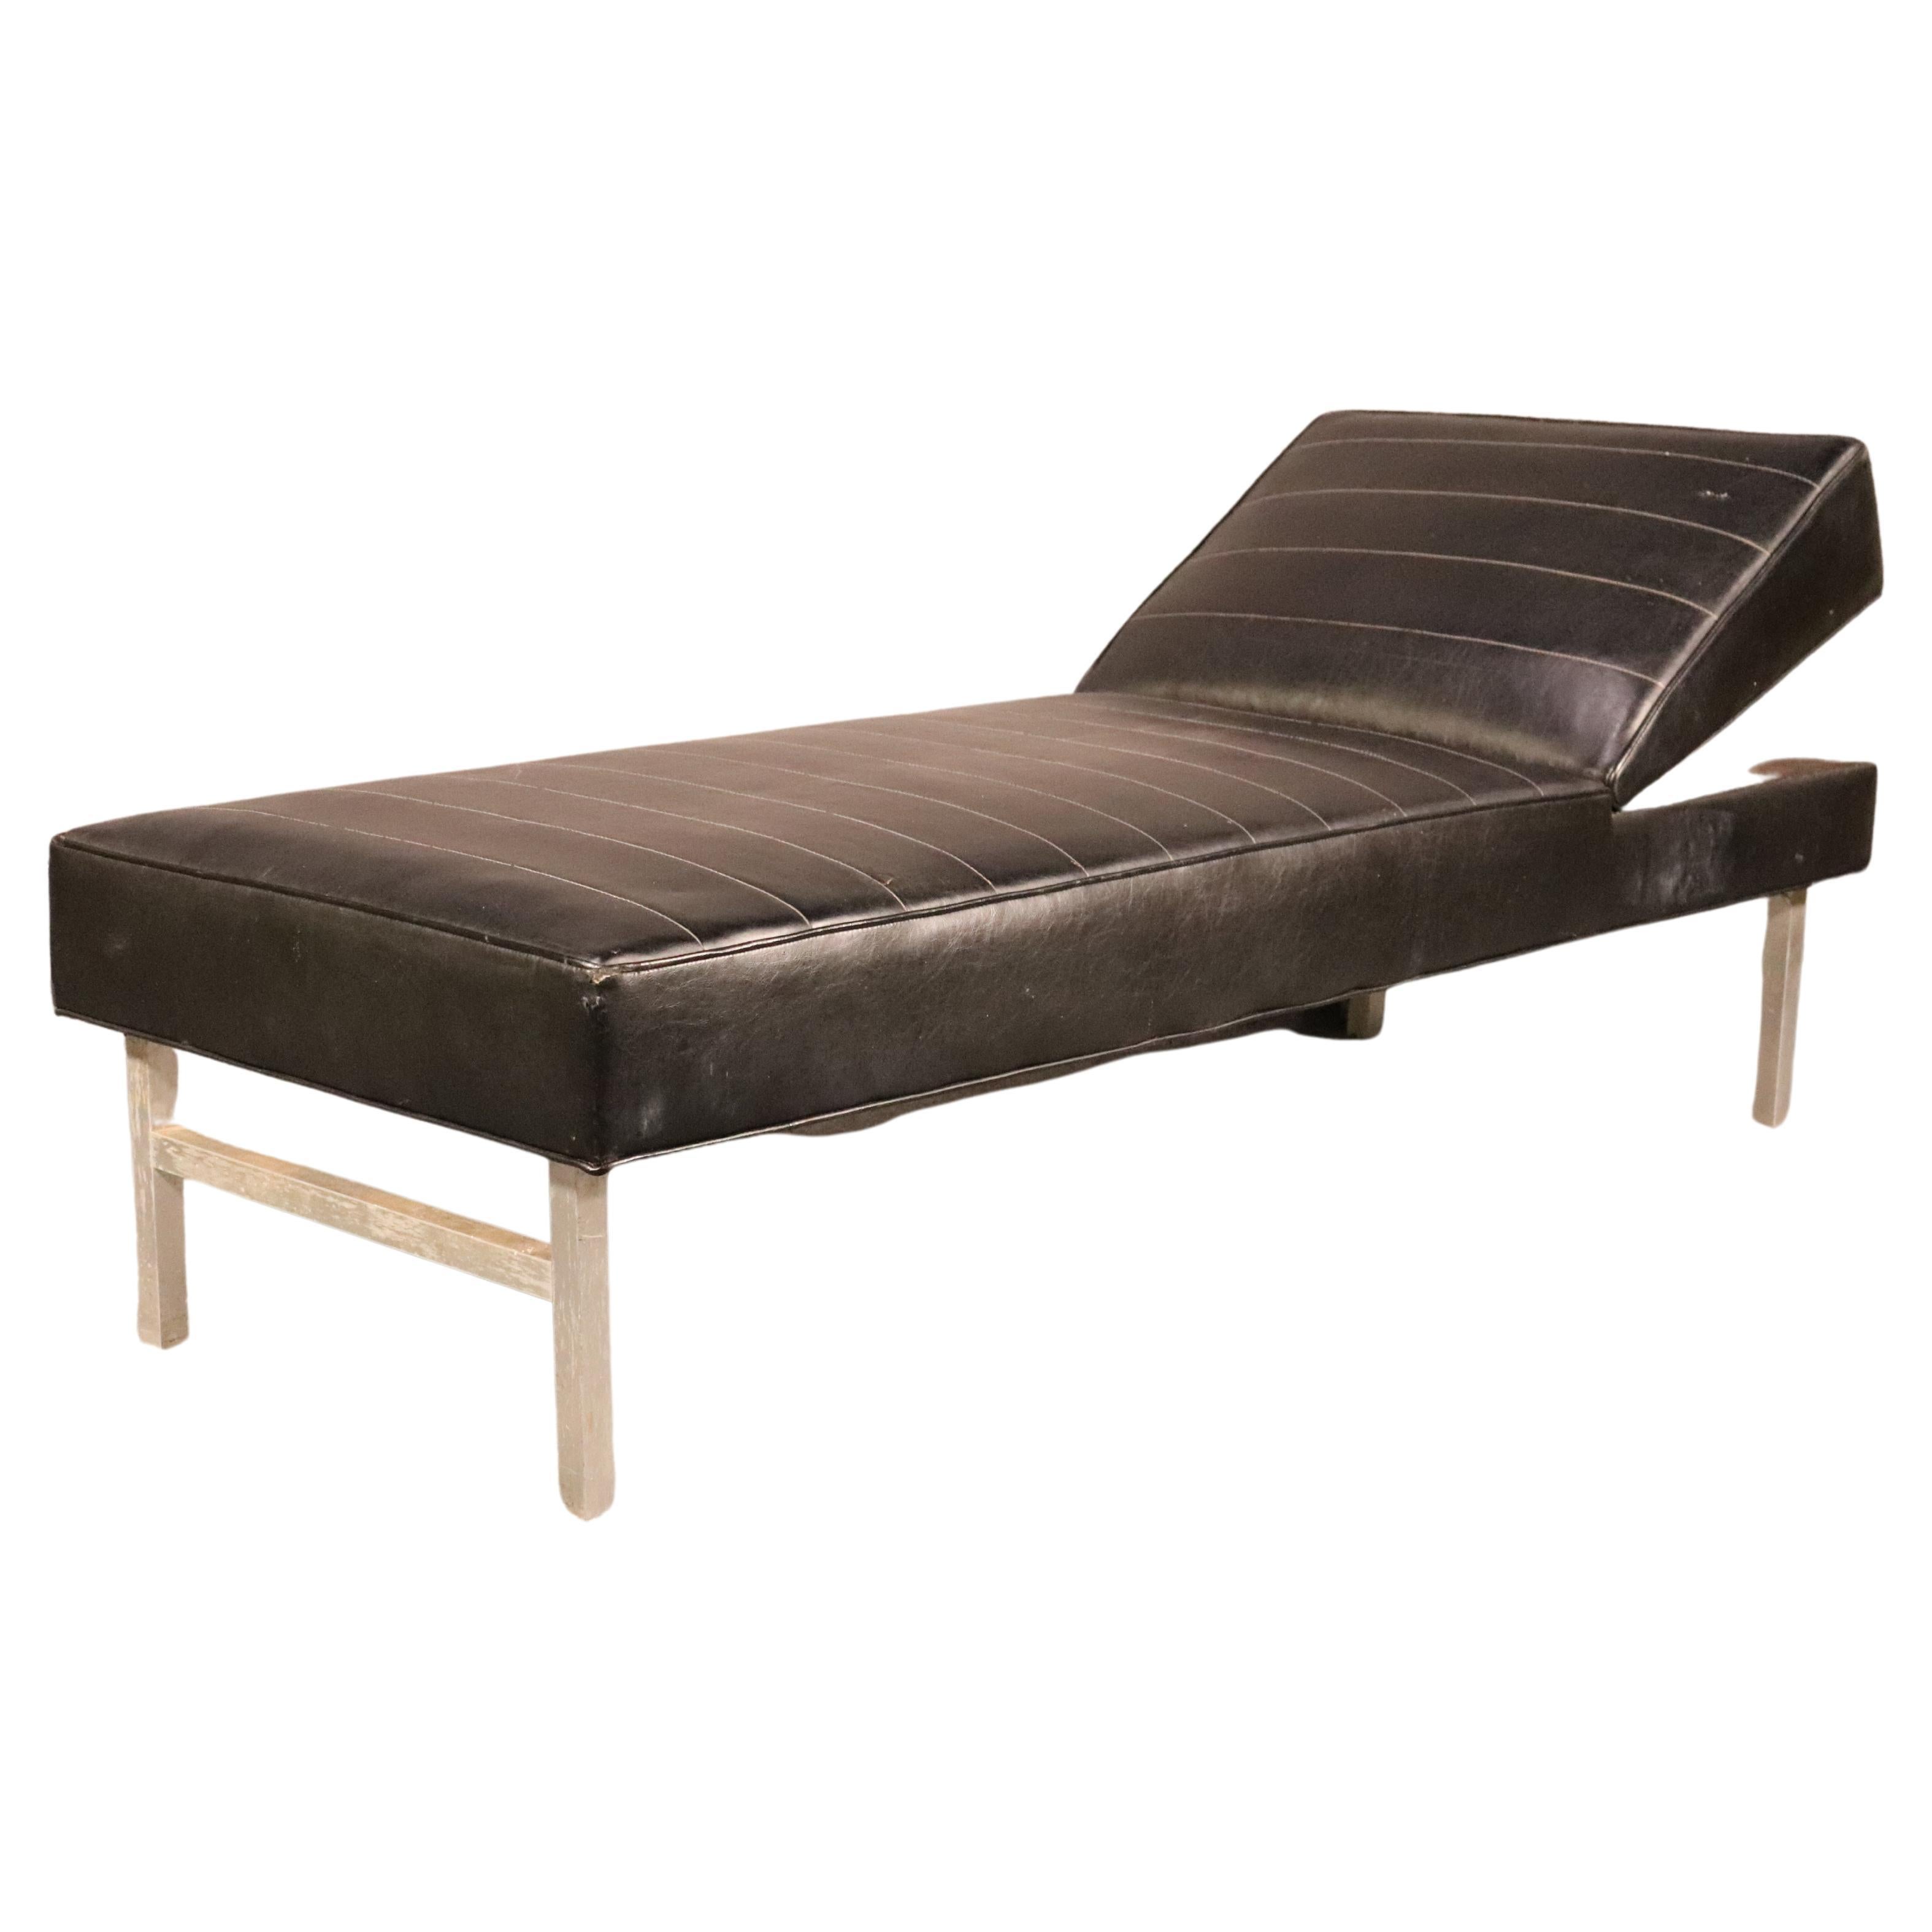 Adjustable Chaise Lounge Chair For Sale